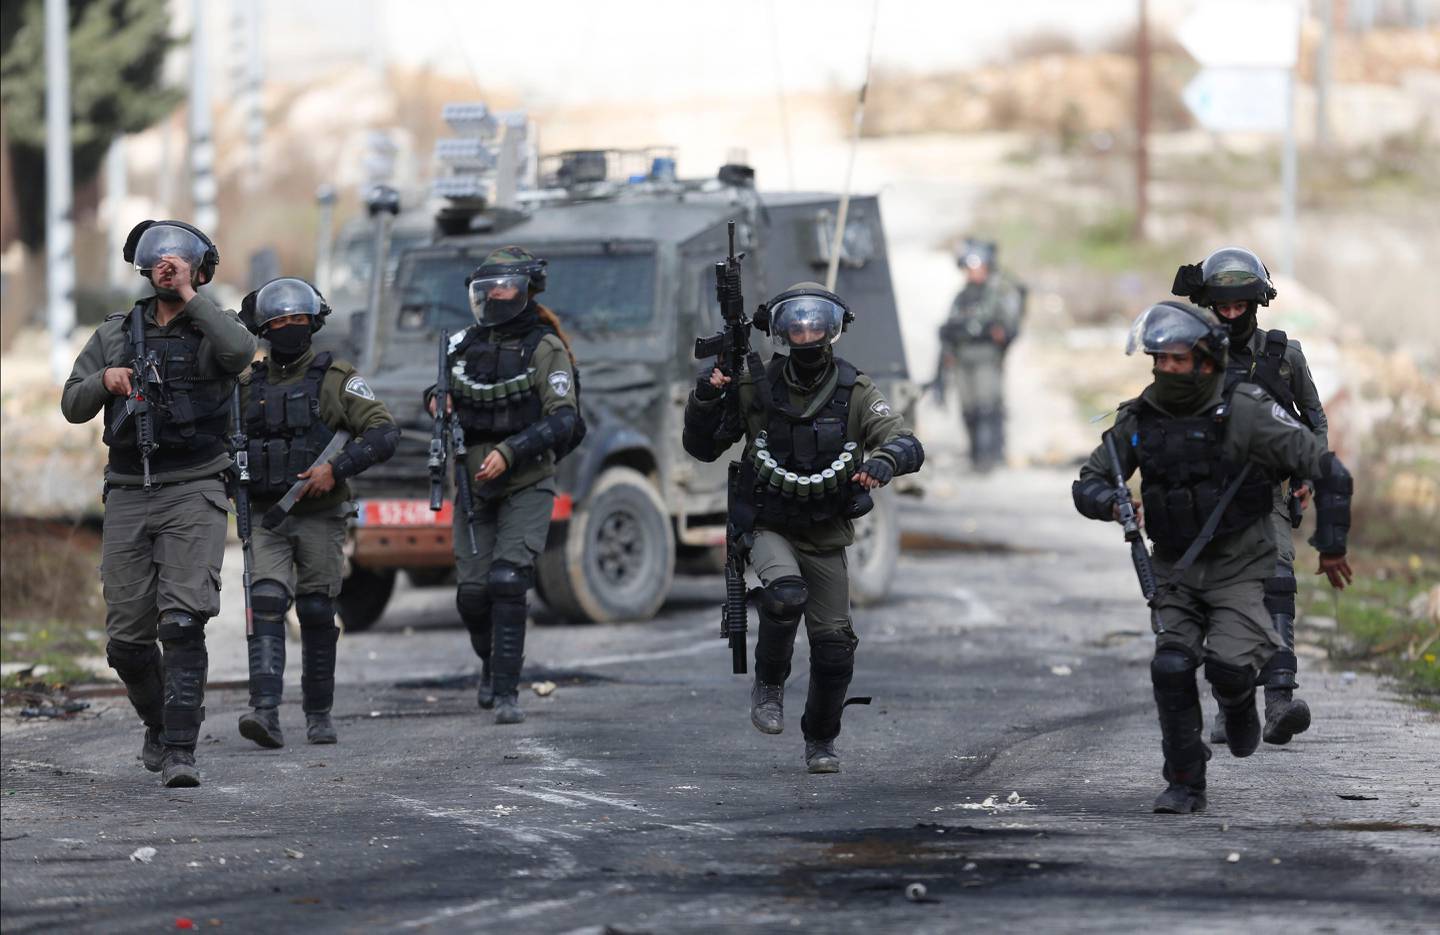 Israeli border police secure take position during clashes withe Palestinian demonstrators as they protest Middle East peace plan announced Tuesday by US President Donald Trump, at Beit El checkpoint, near the West Bank city of Ramallah, Saturday, Feb 1, 2020 (AP Photo/Majdi Mohammed)